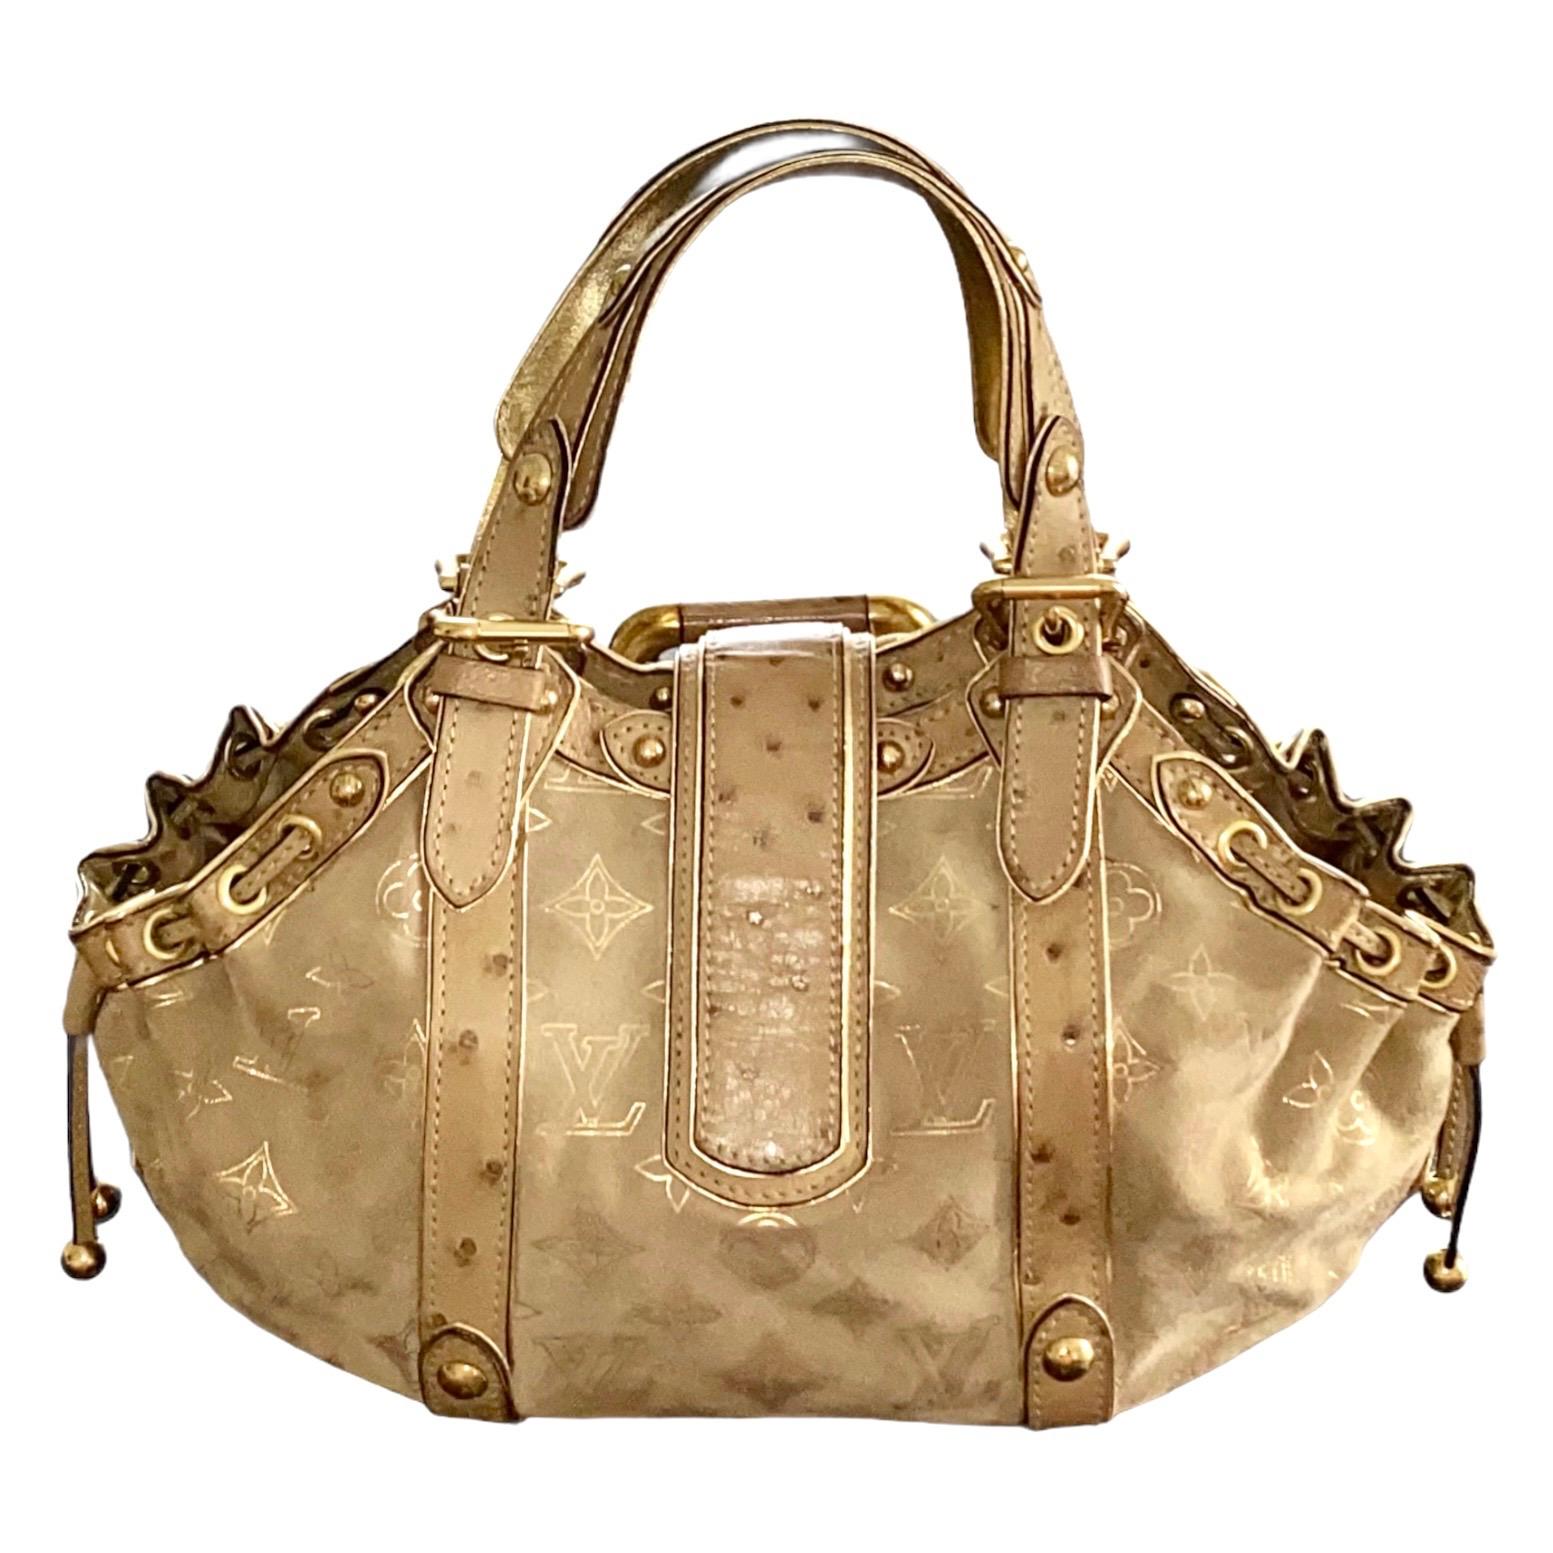 A stunning beige & gold suede and ostrich skin bag by Louis Vuitton
This bag was produced in a limited edition and made to order 
Finest suede leather imprinted with the famous LV monogram logo
Golden hardware
Ostrich skin trimming
Lined with